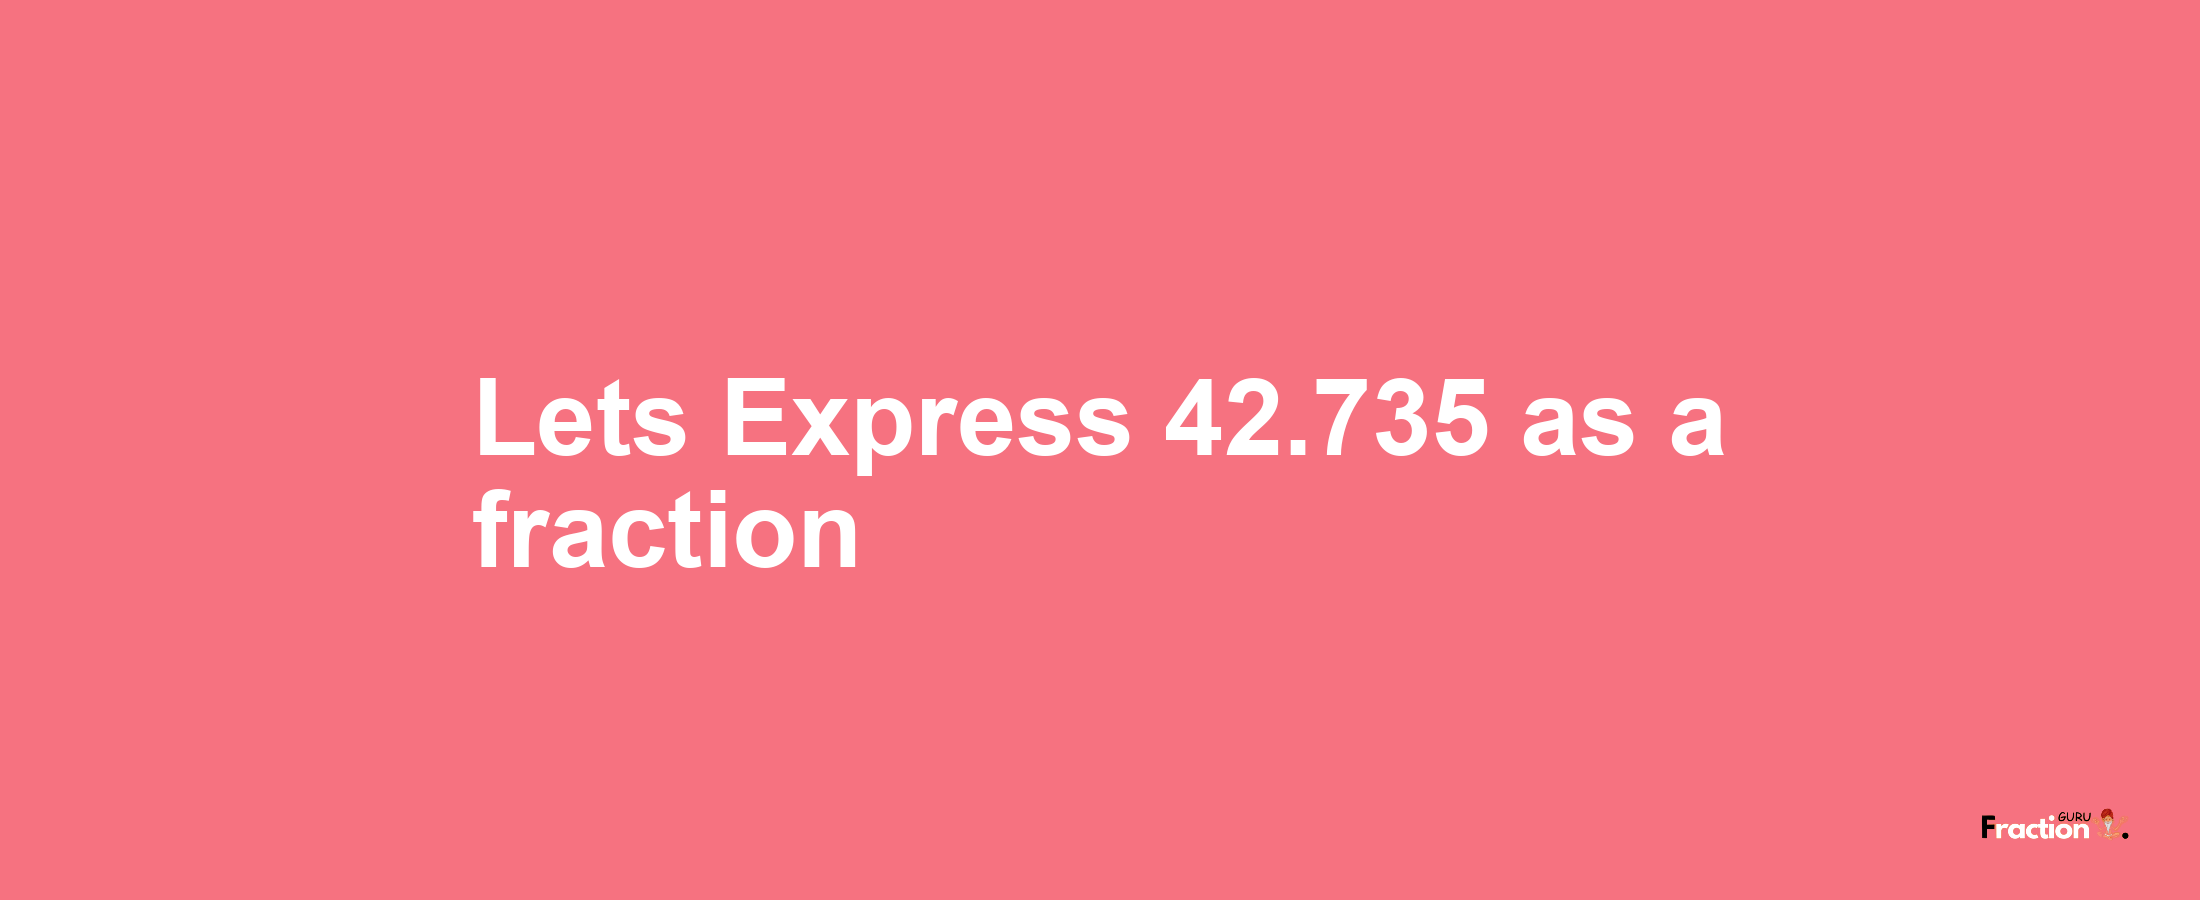 Lets Express 42.735 as afraction